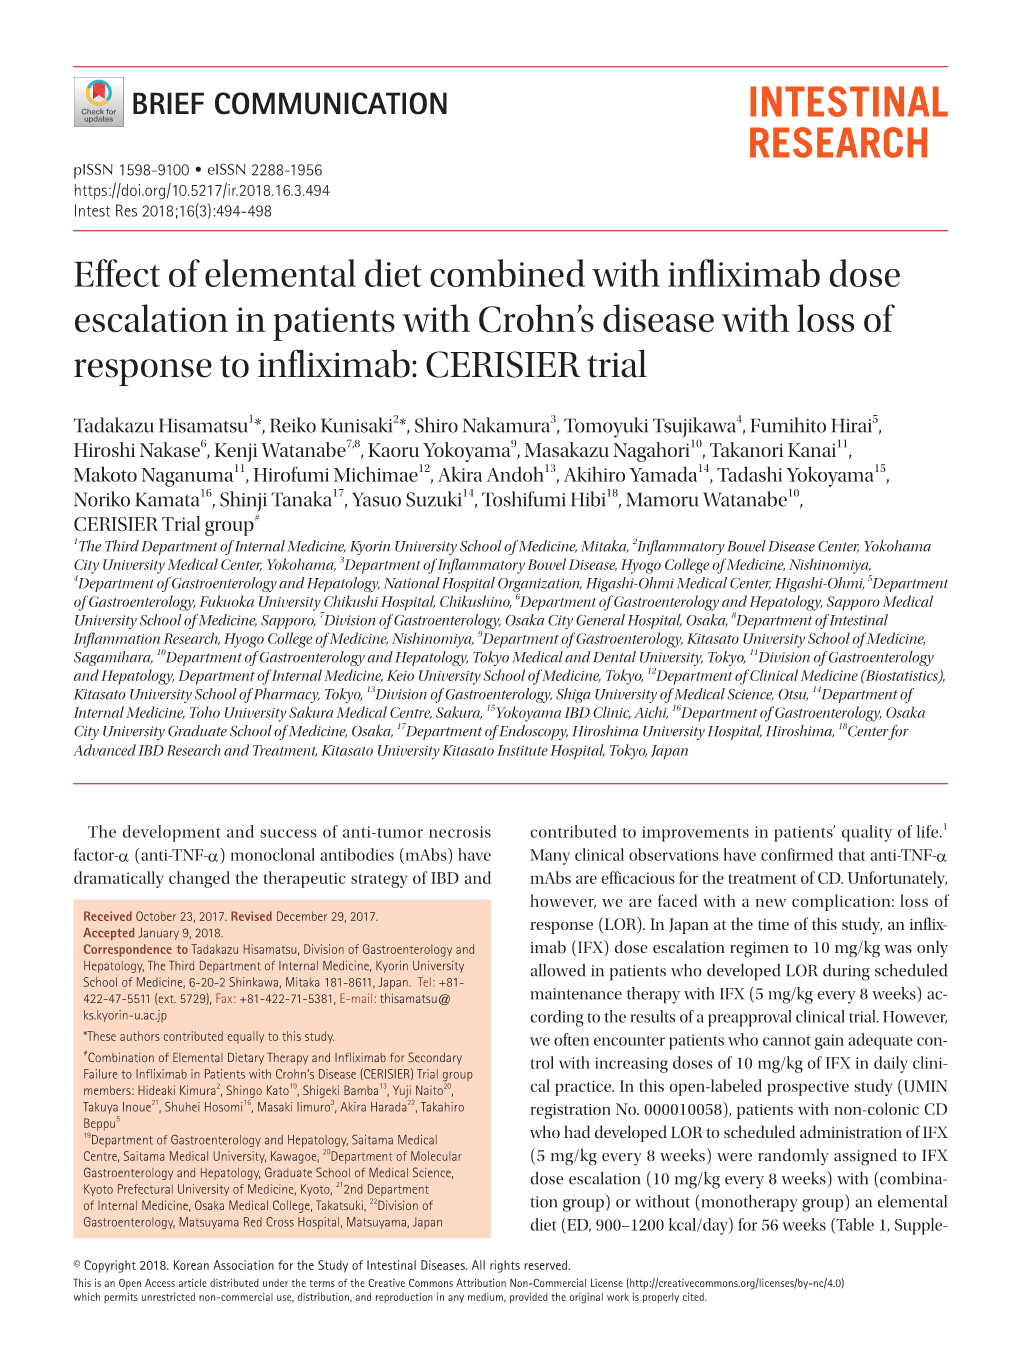 Effect of Elemental Diet Combined with Infliximab Dose Escalation in Patients with Crohn’S Disease with Loss of Response to Infliximab: CERISIER Trial